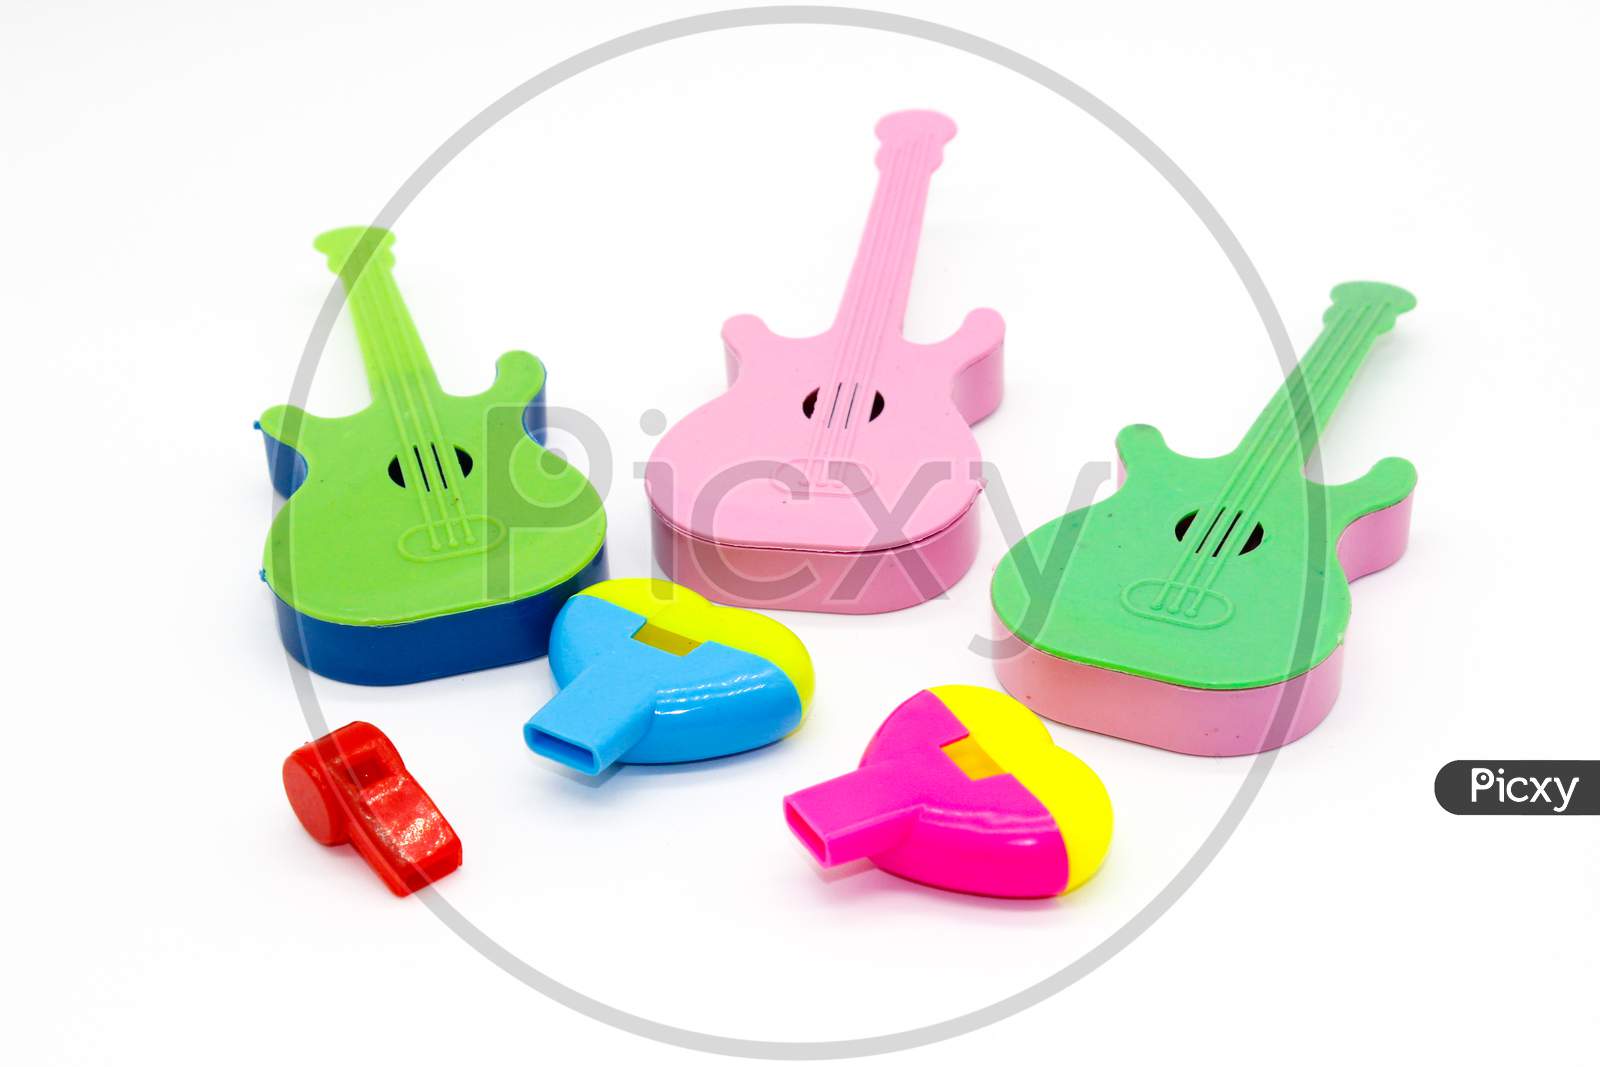 Toys On White Background With Selective Focus